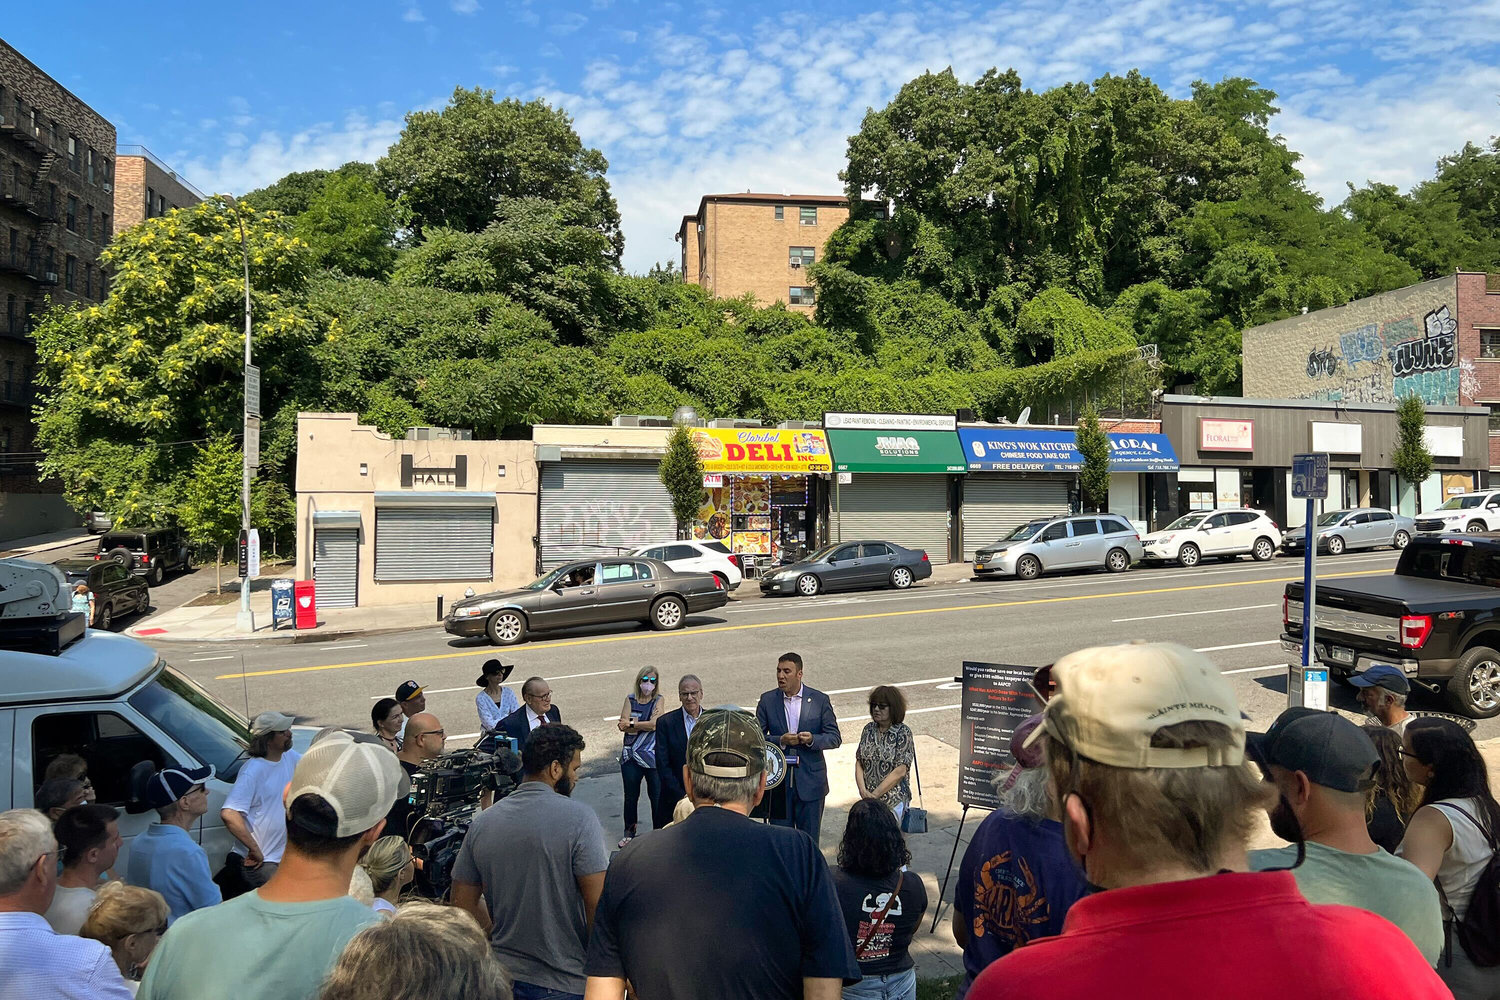 As state and city officials brief residents about their call for an investigation into the proposed men’s homeless shelter, in the background you can see the six storefronts that would be affected and have already received notice to vacate by the end of the year.